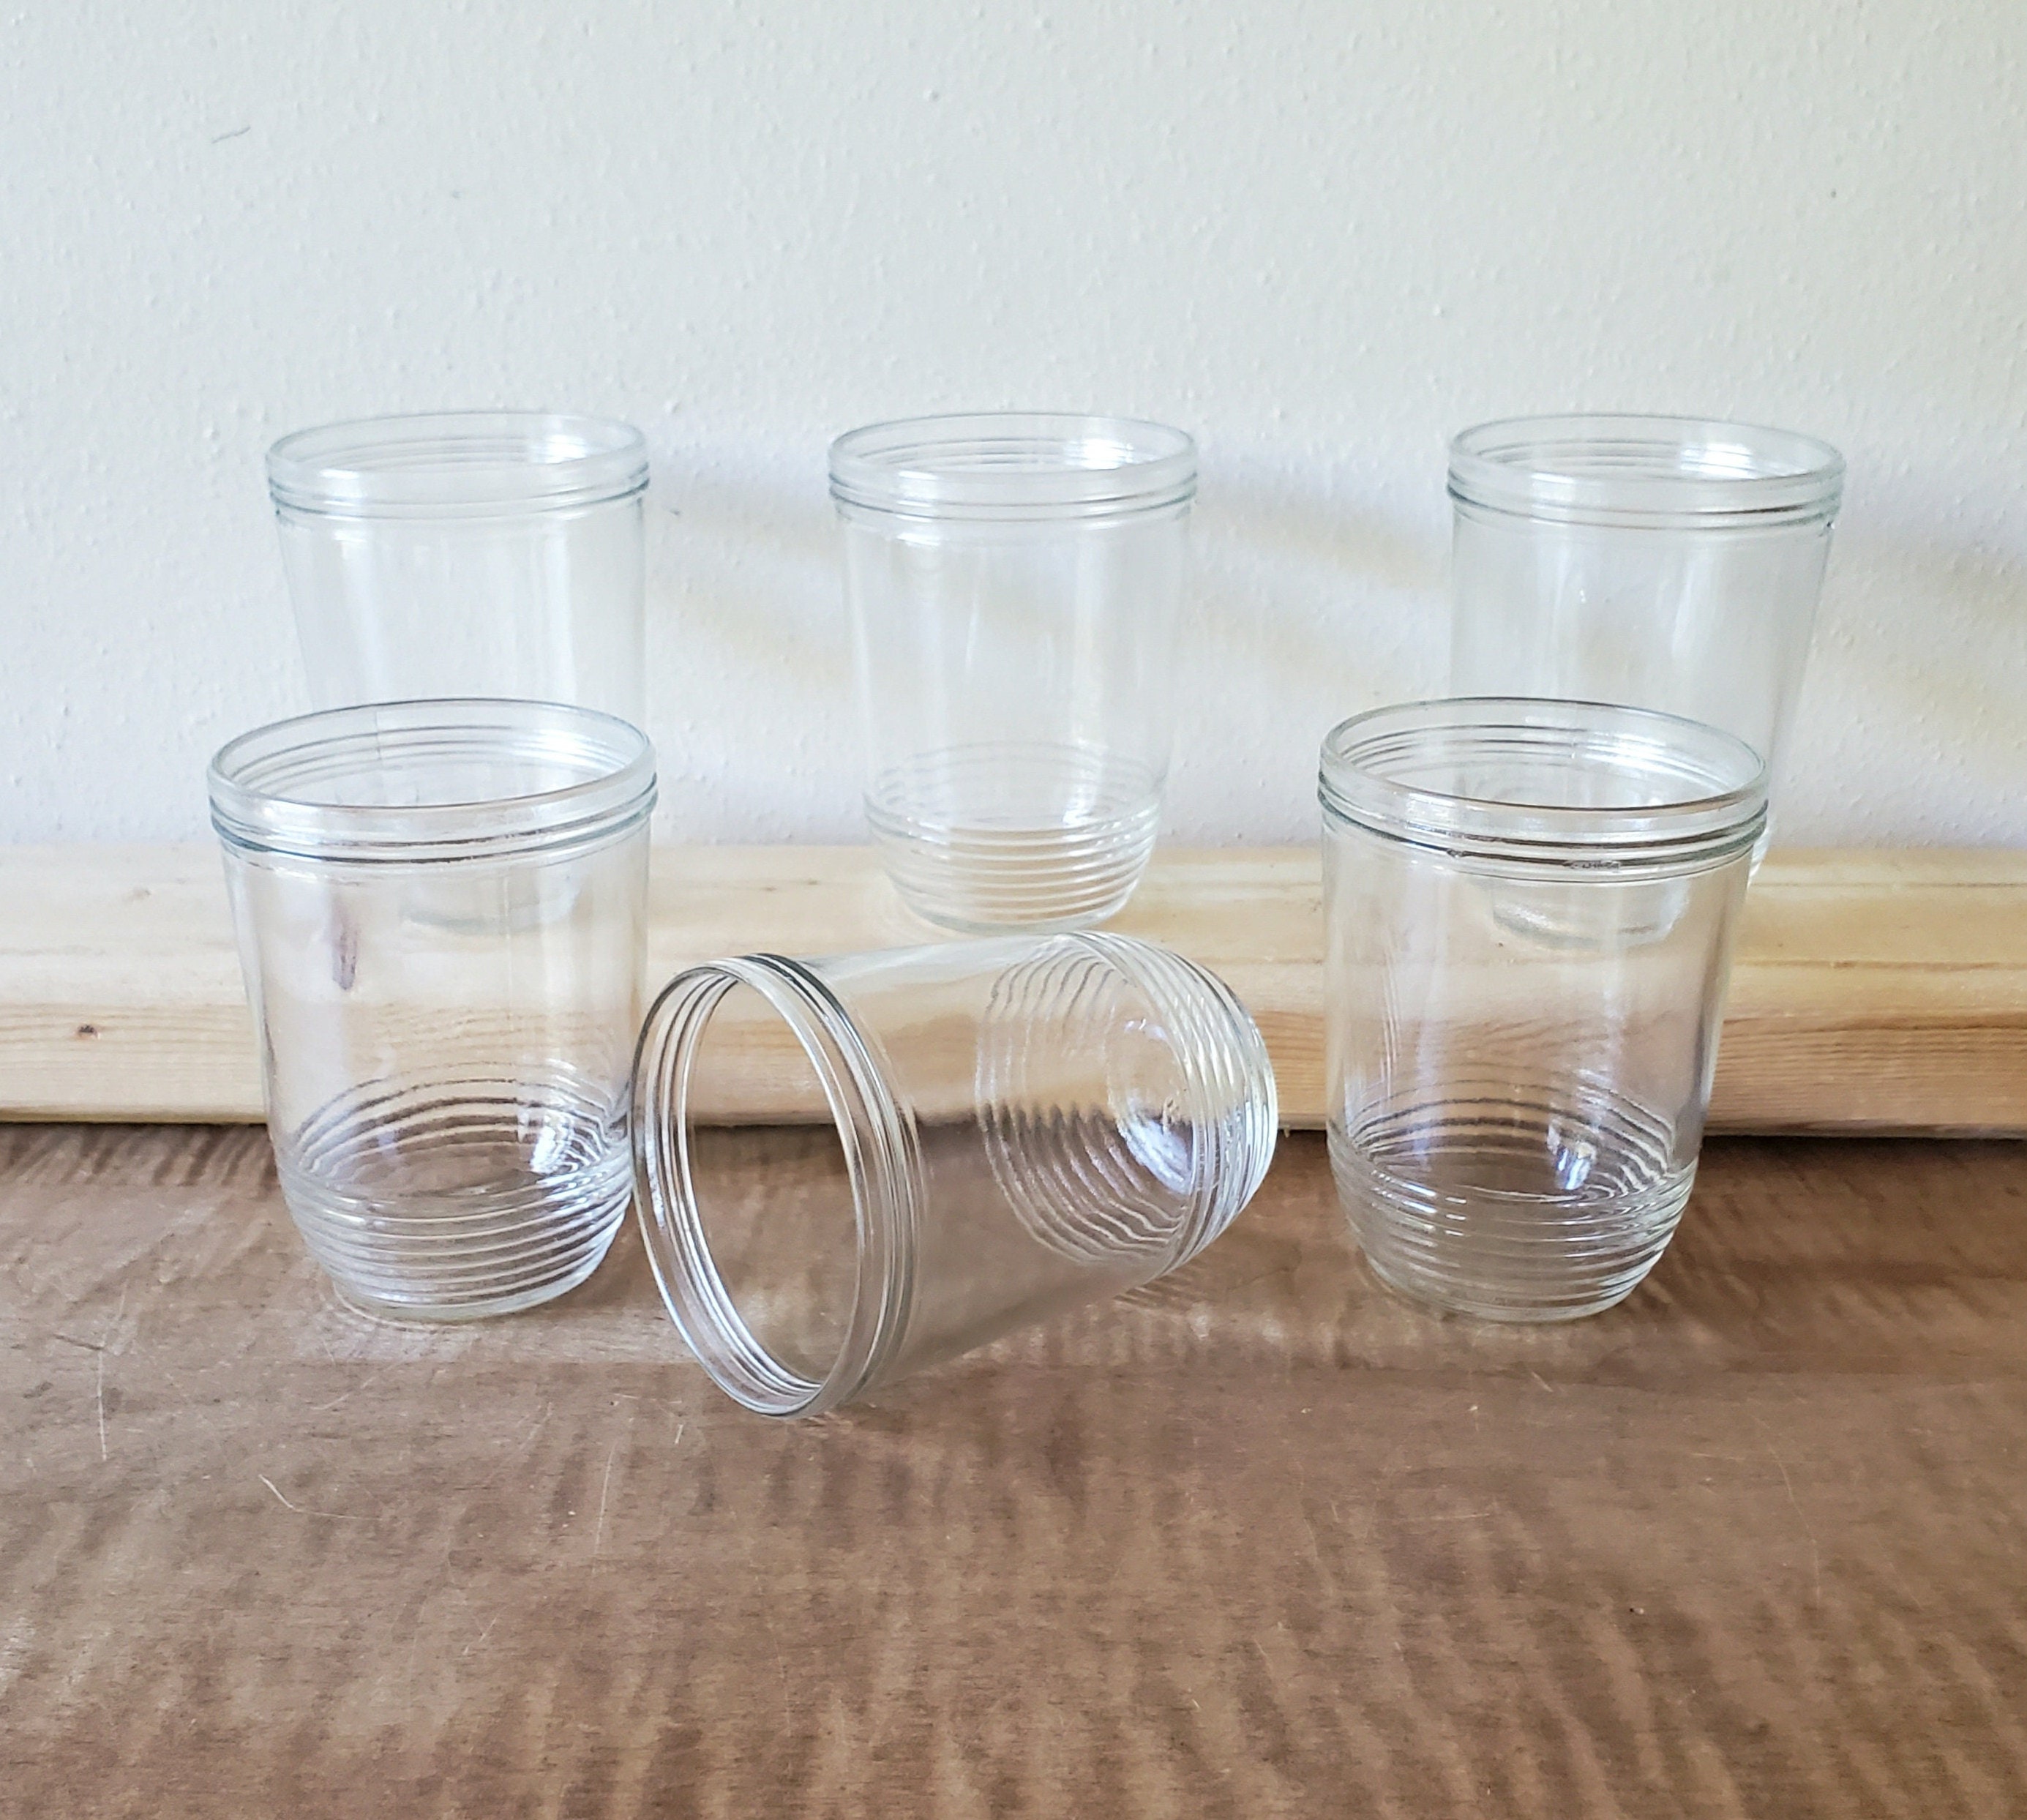 Vintage KERR Clear Glass Jelly Jar Style Tumbler Glasses Set of 6 Clear  Drinking Glass Ribbed Textured Bark Design 16 Oz. Glasses 